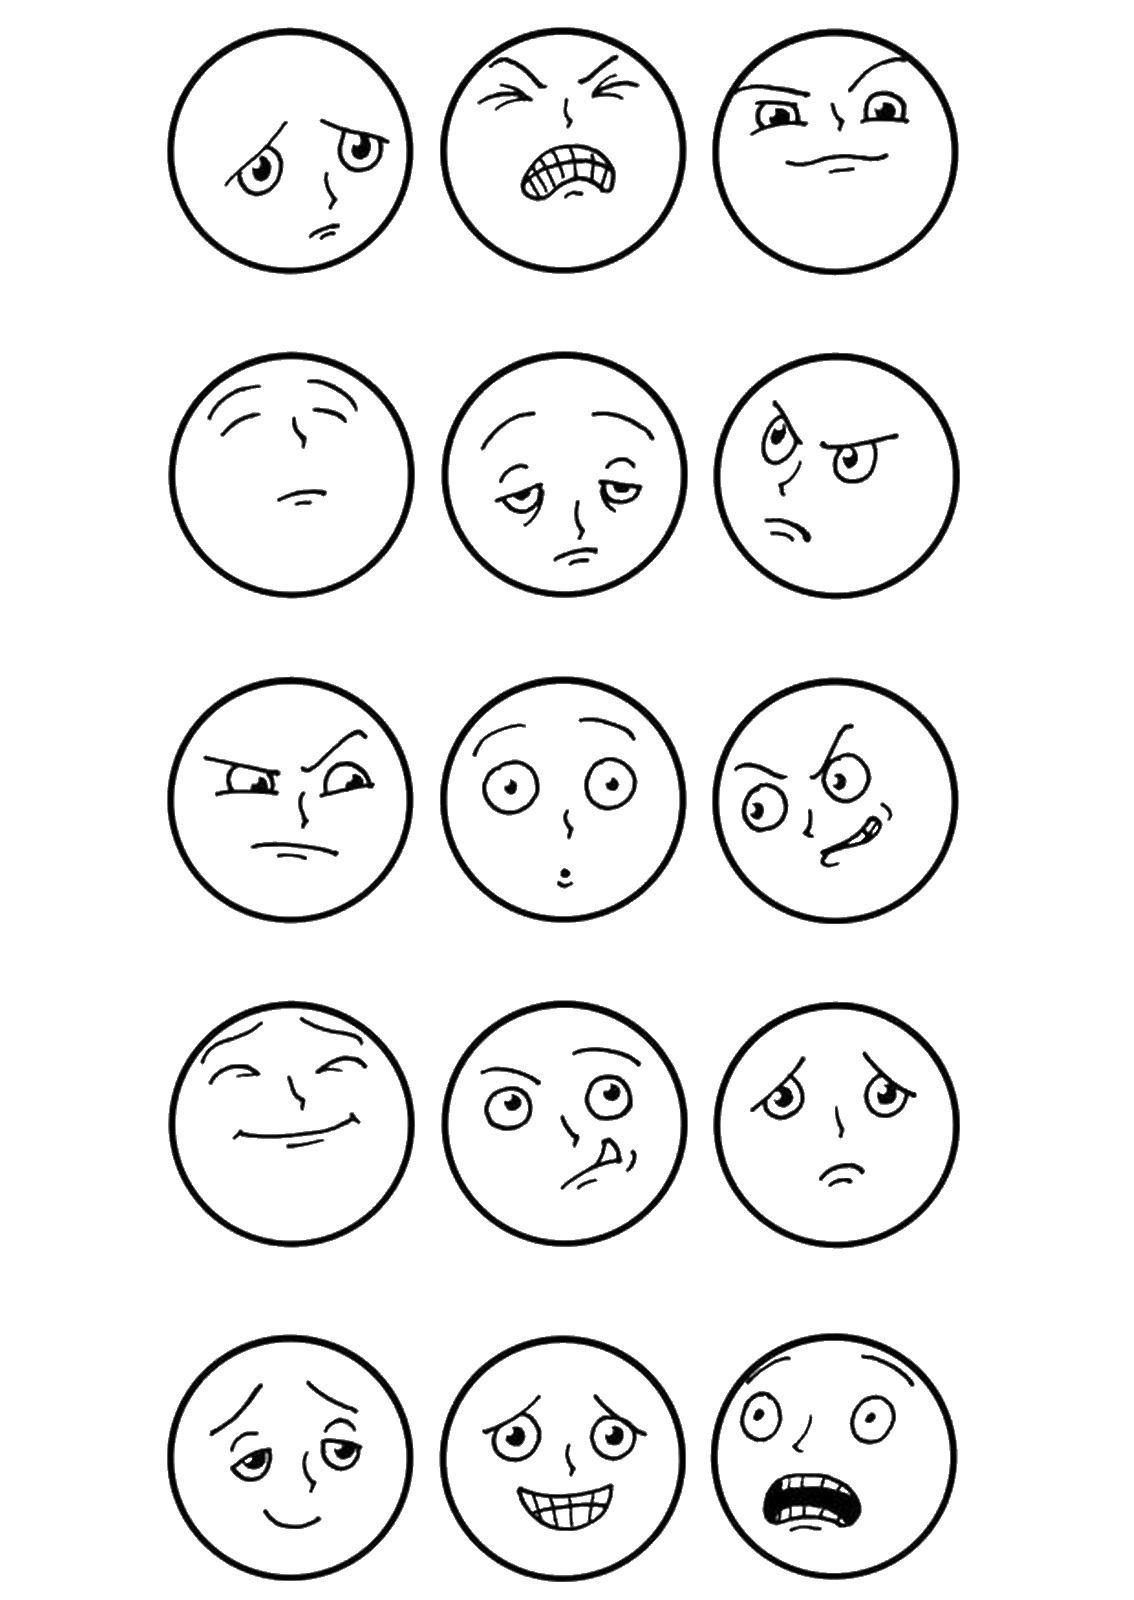 Top 20 Free Printable Emotions Coloring Pages Online | Coloring - Free Printable Pictures Of Emotions